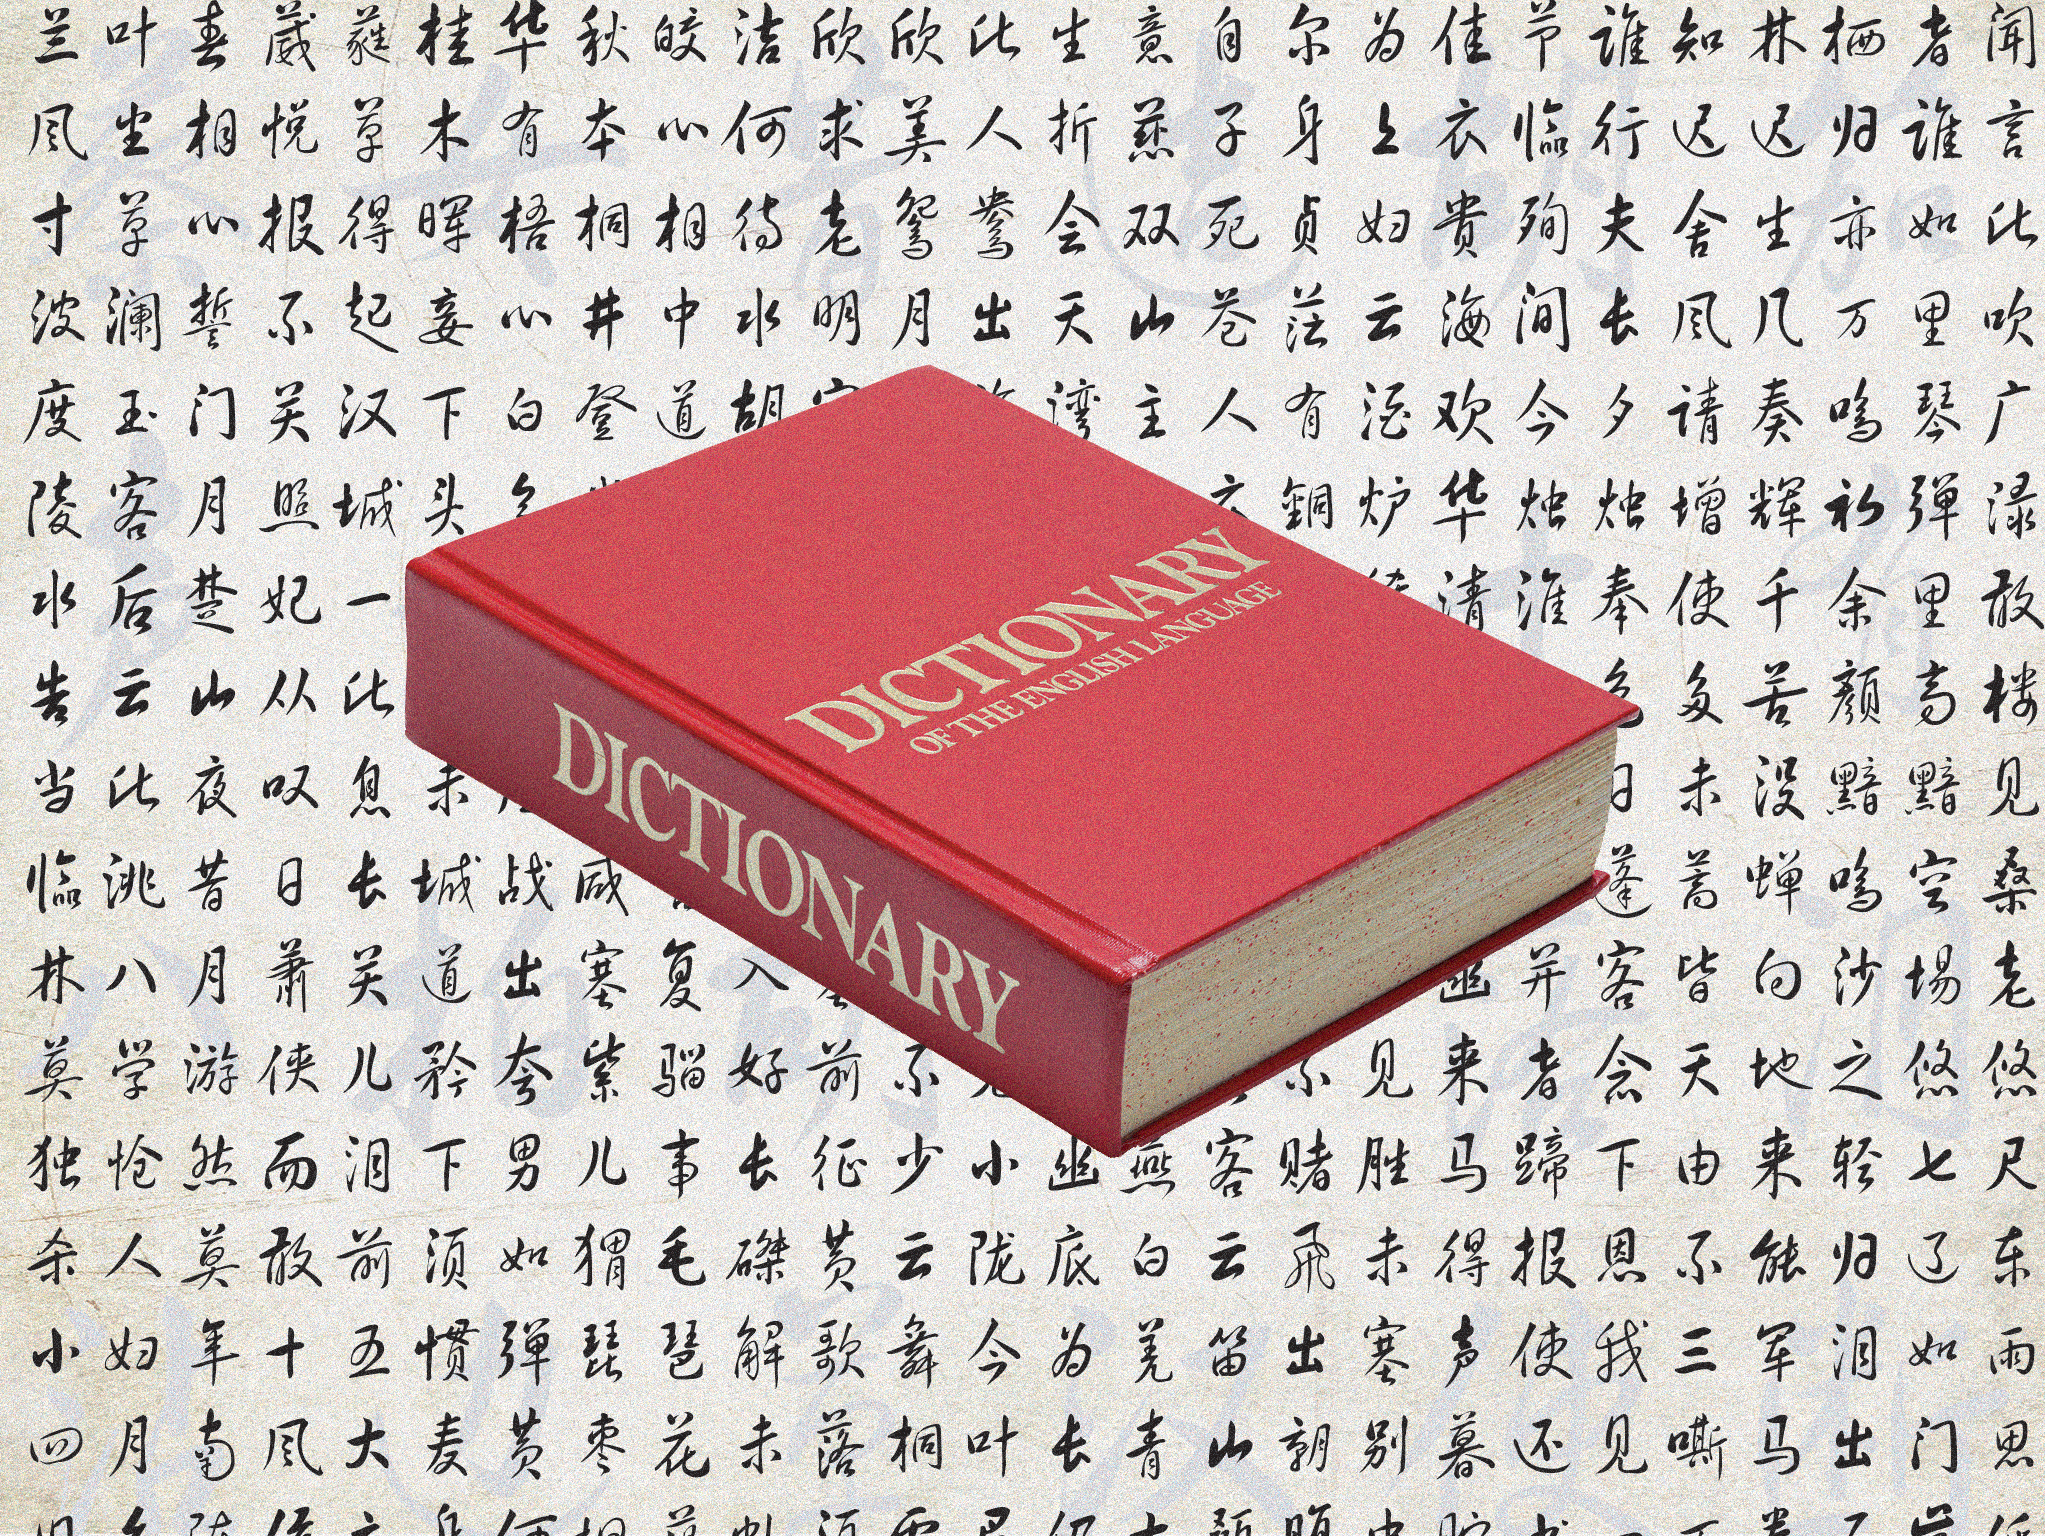 23 New Japanese Words Added to Oxford English Dictionary